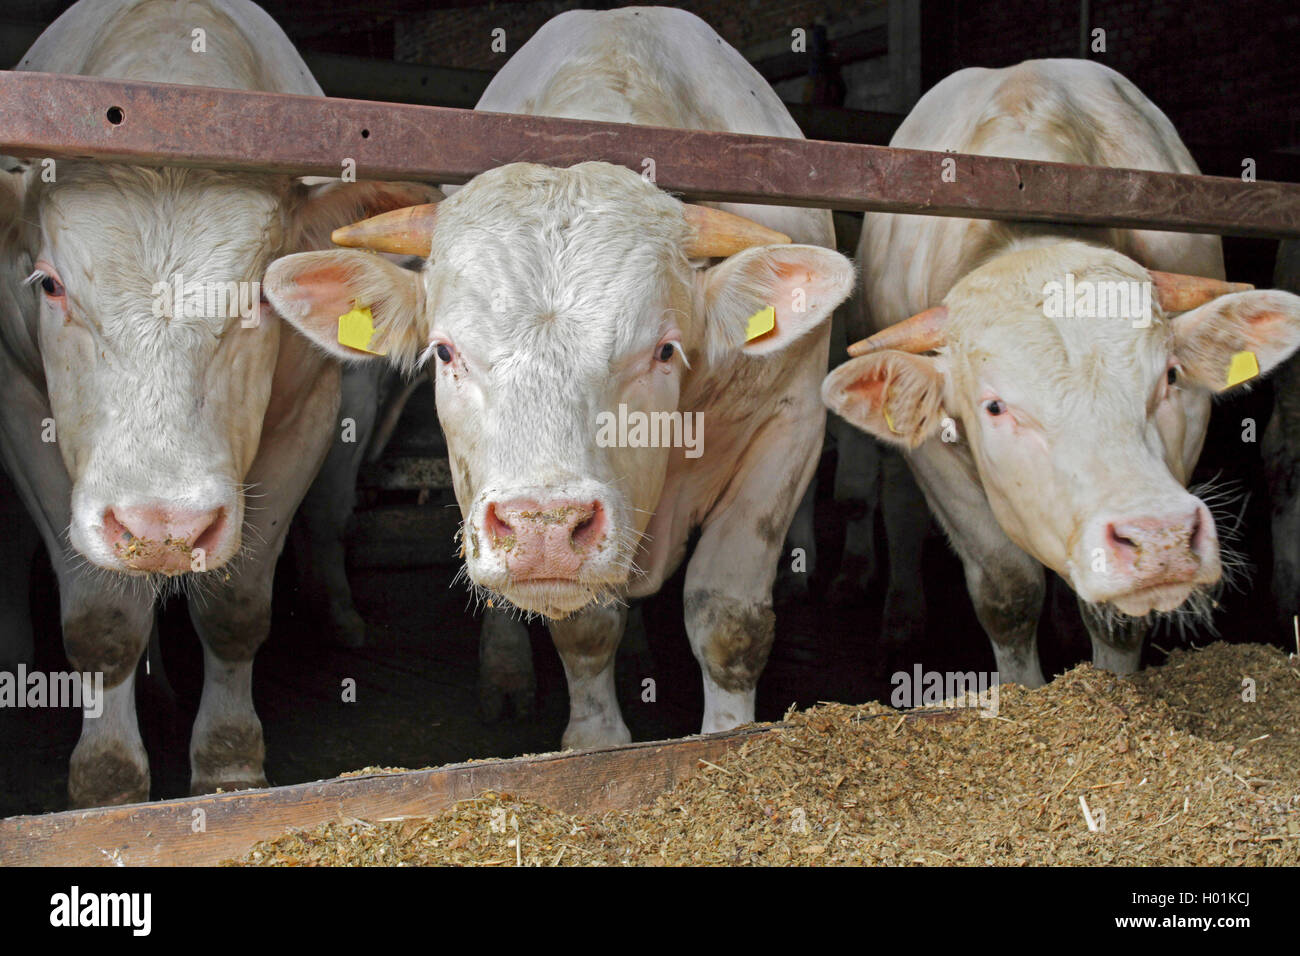 Charolais cattle (Bos primigenius f. taurus), three Charolais cattles in the stable, front view, Germany Stock Photo